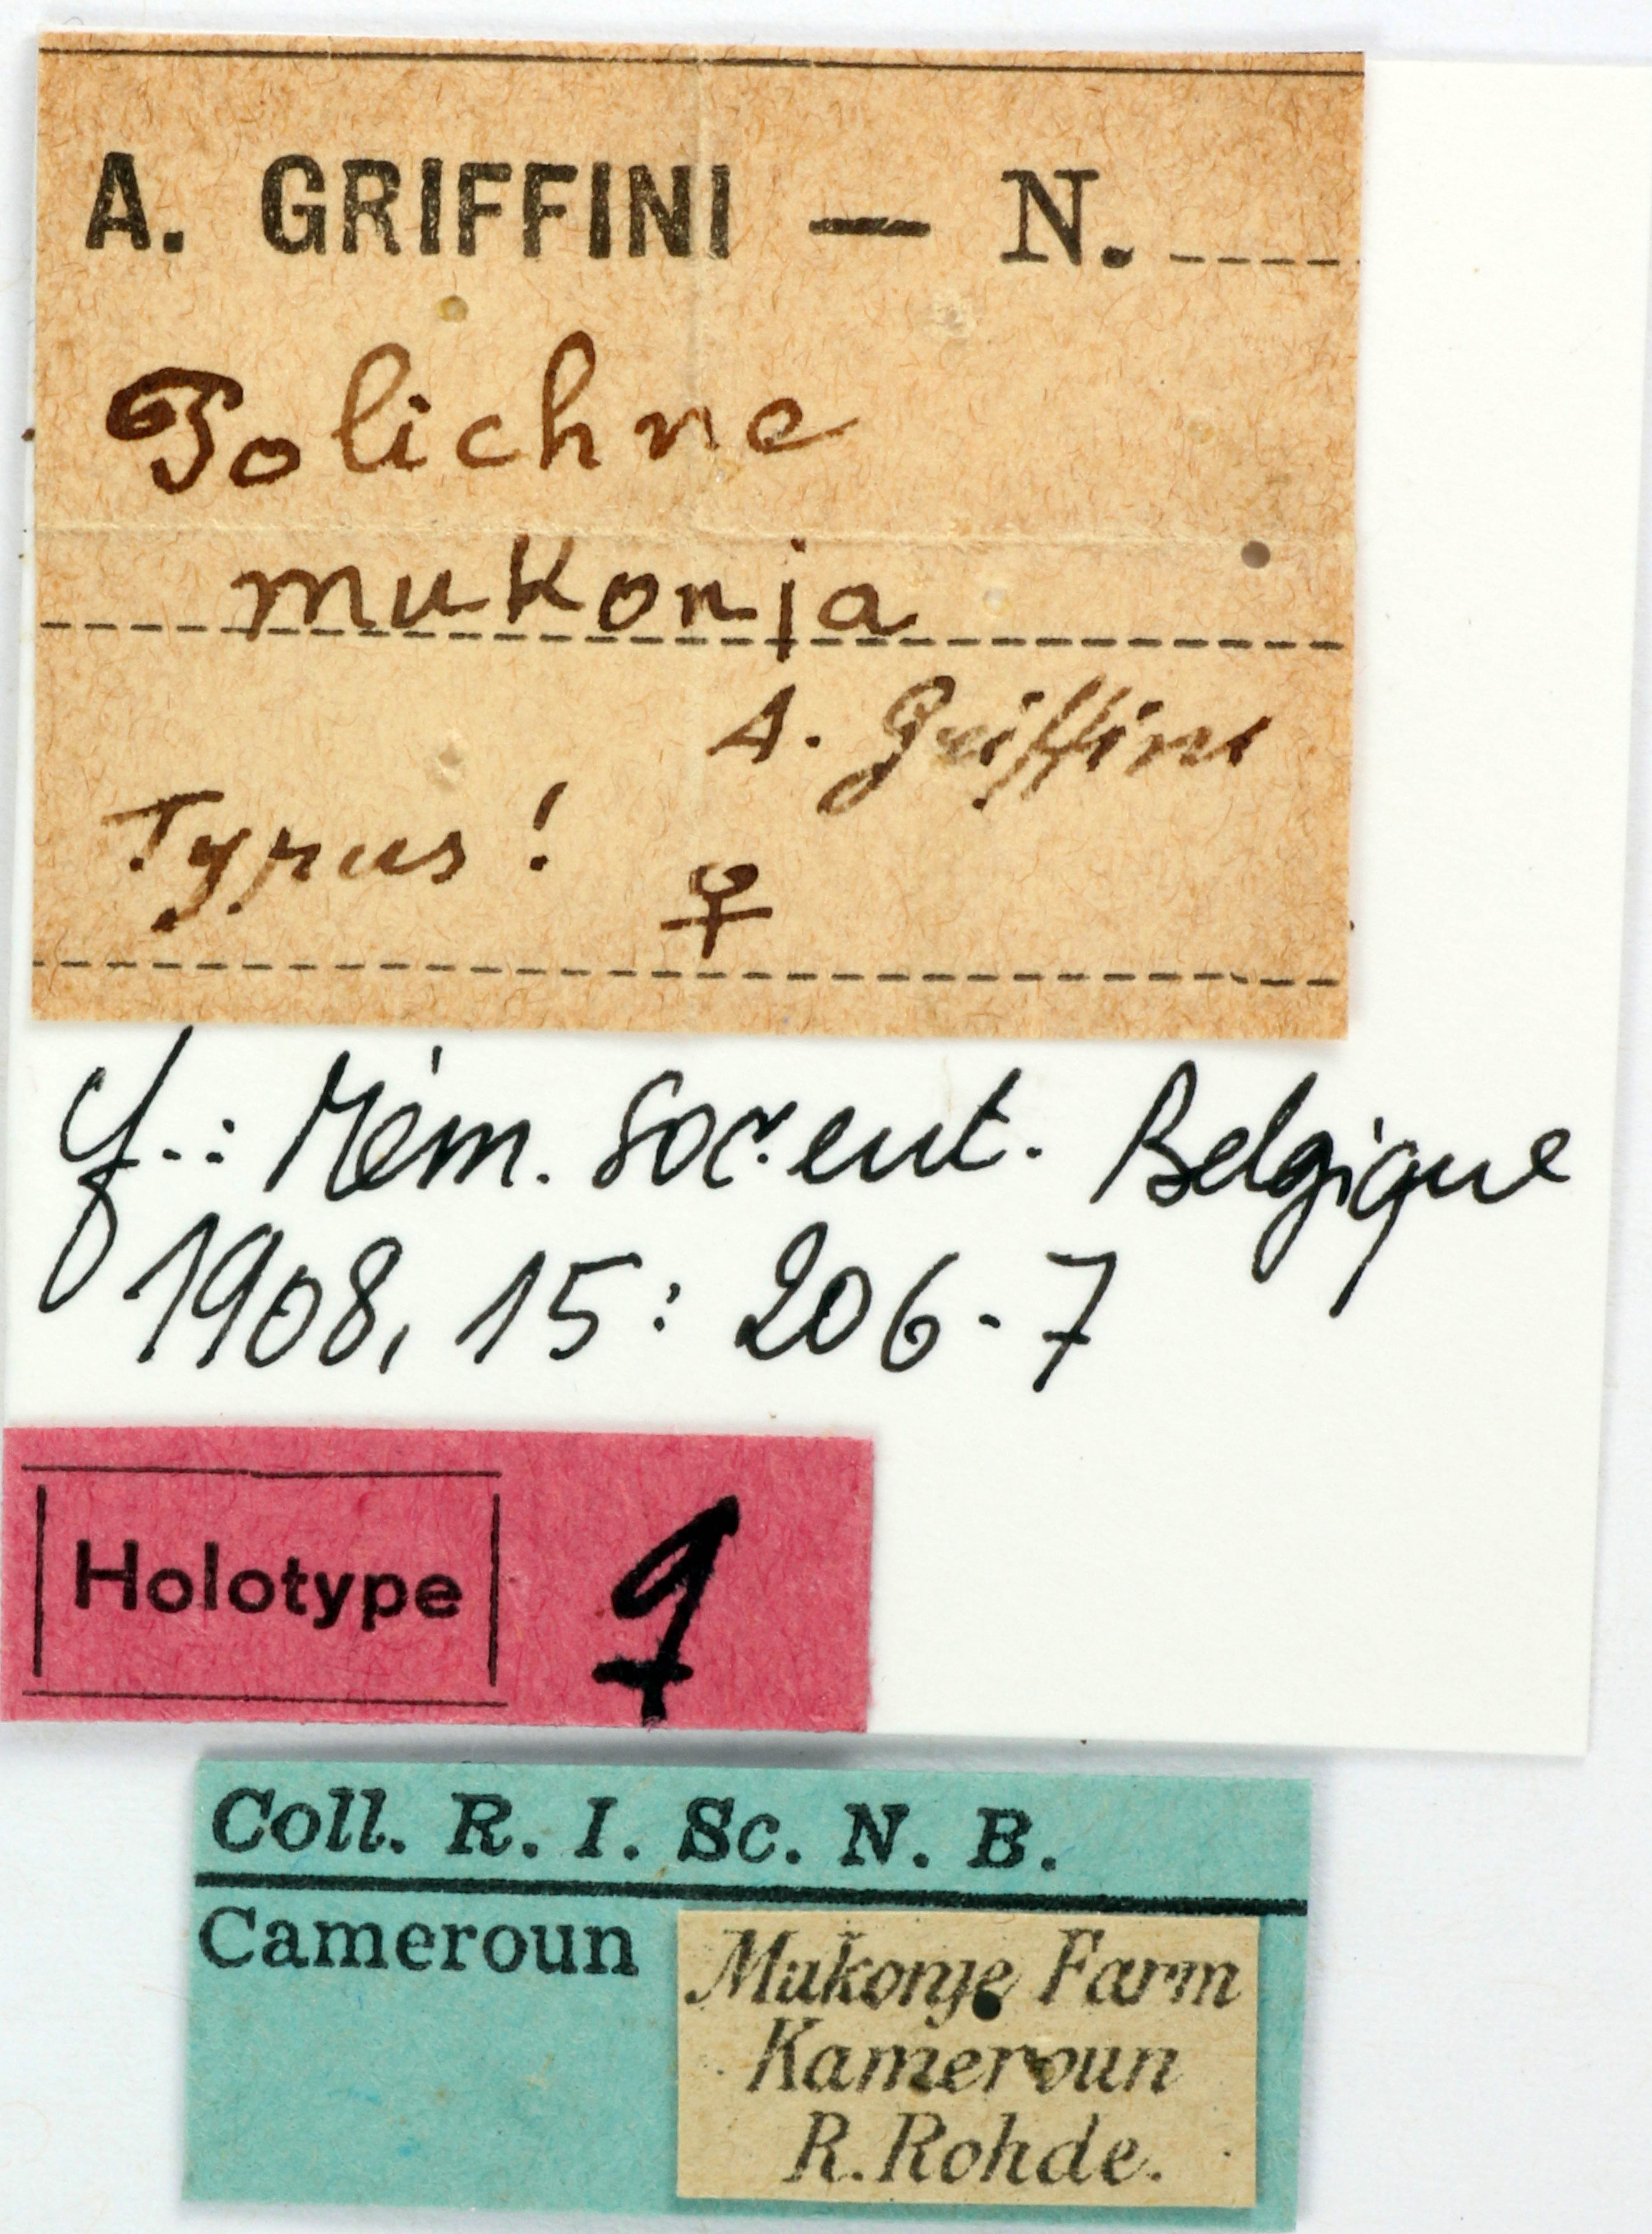 BE-RBINS-ENT Polichne mukonja Holotype Female Labels Jerome Constant.JPG